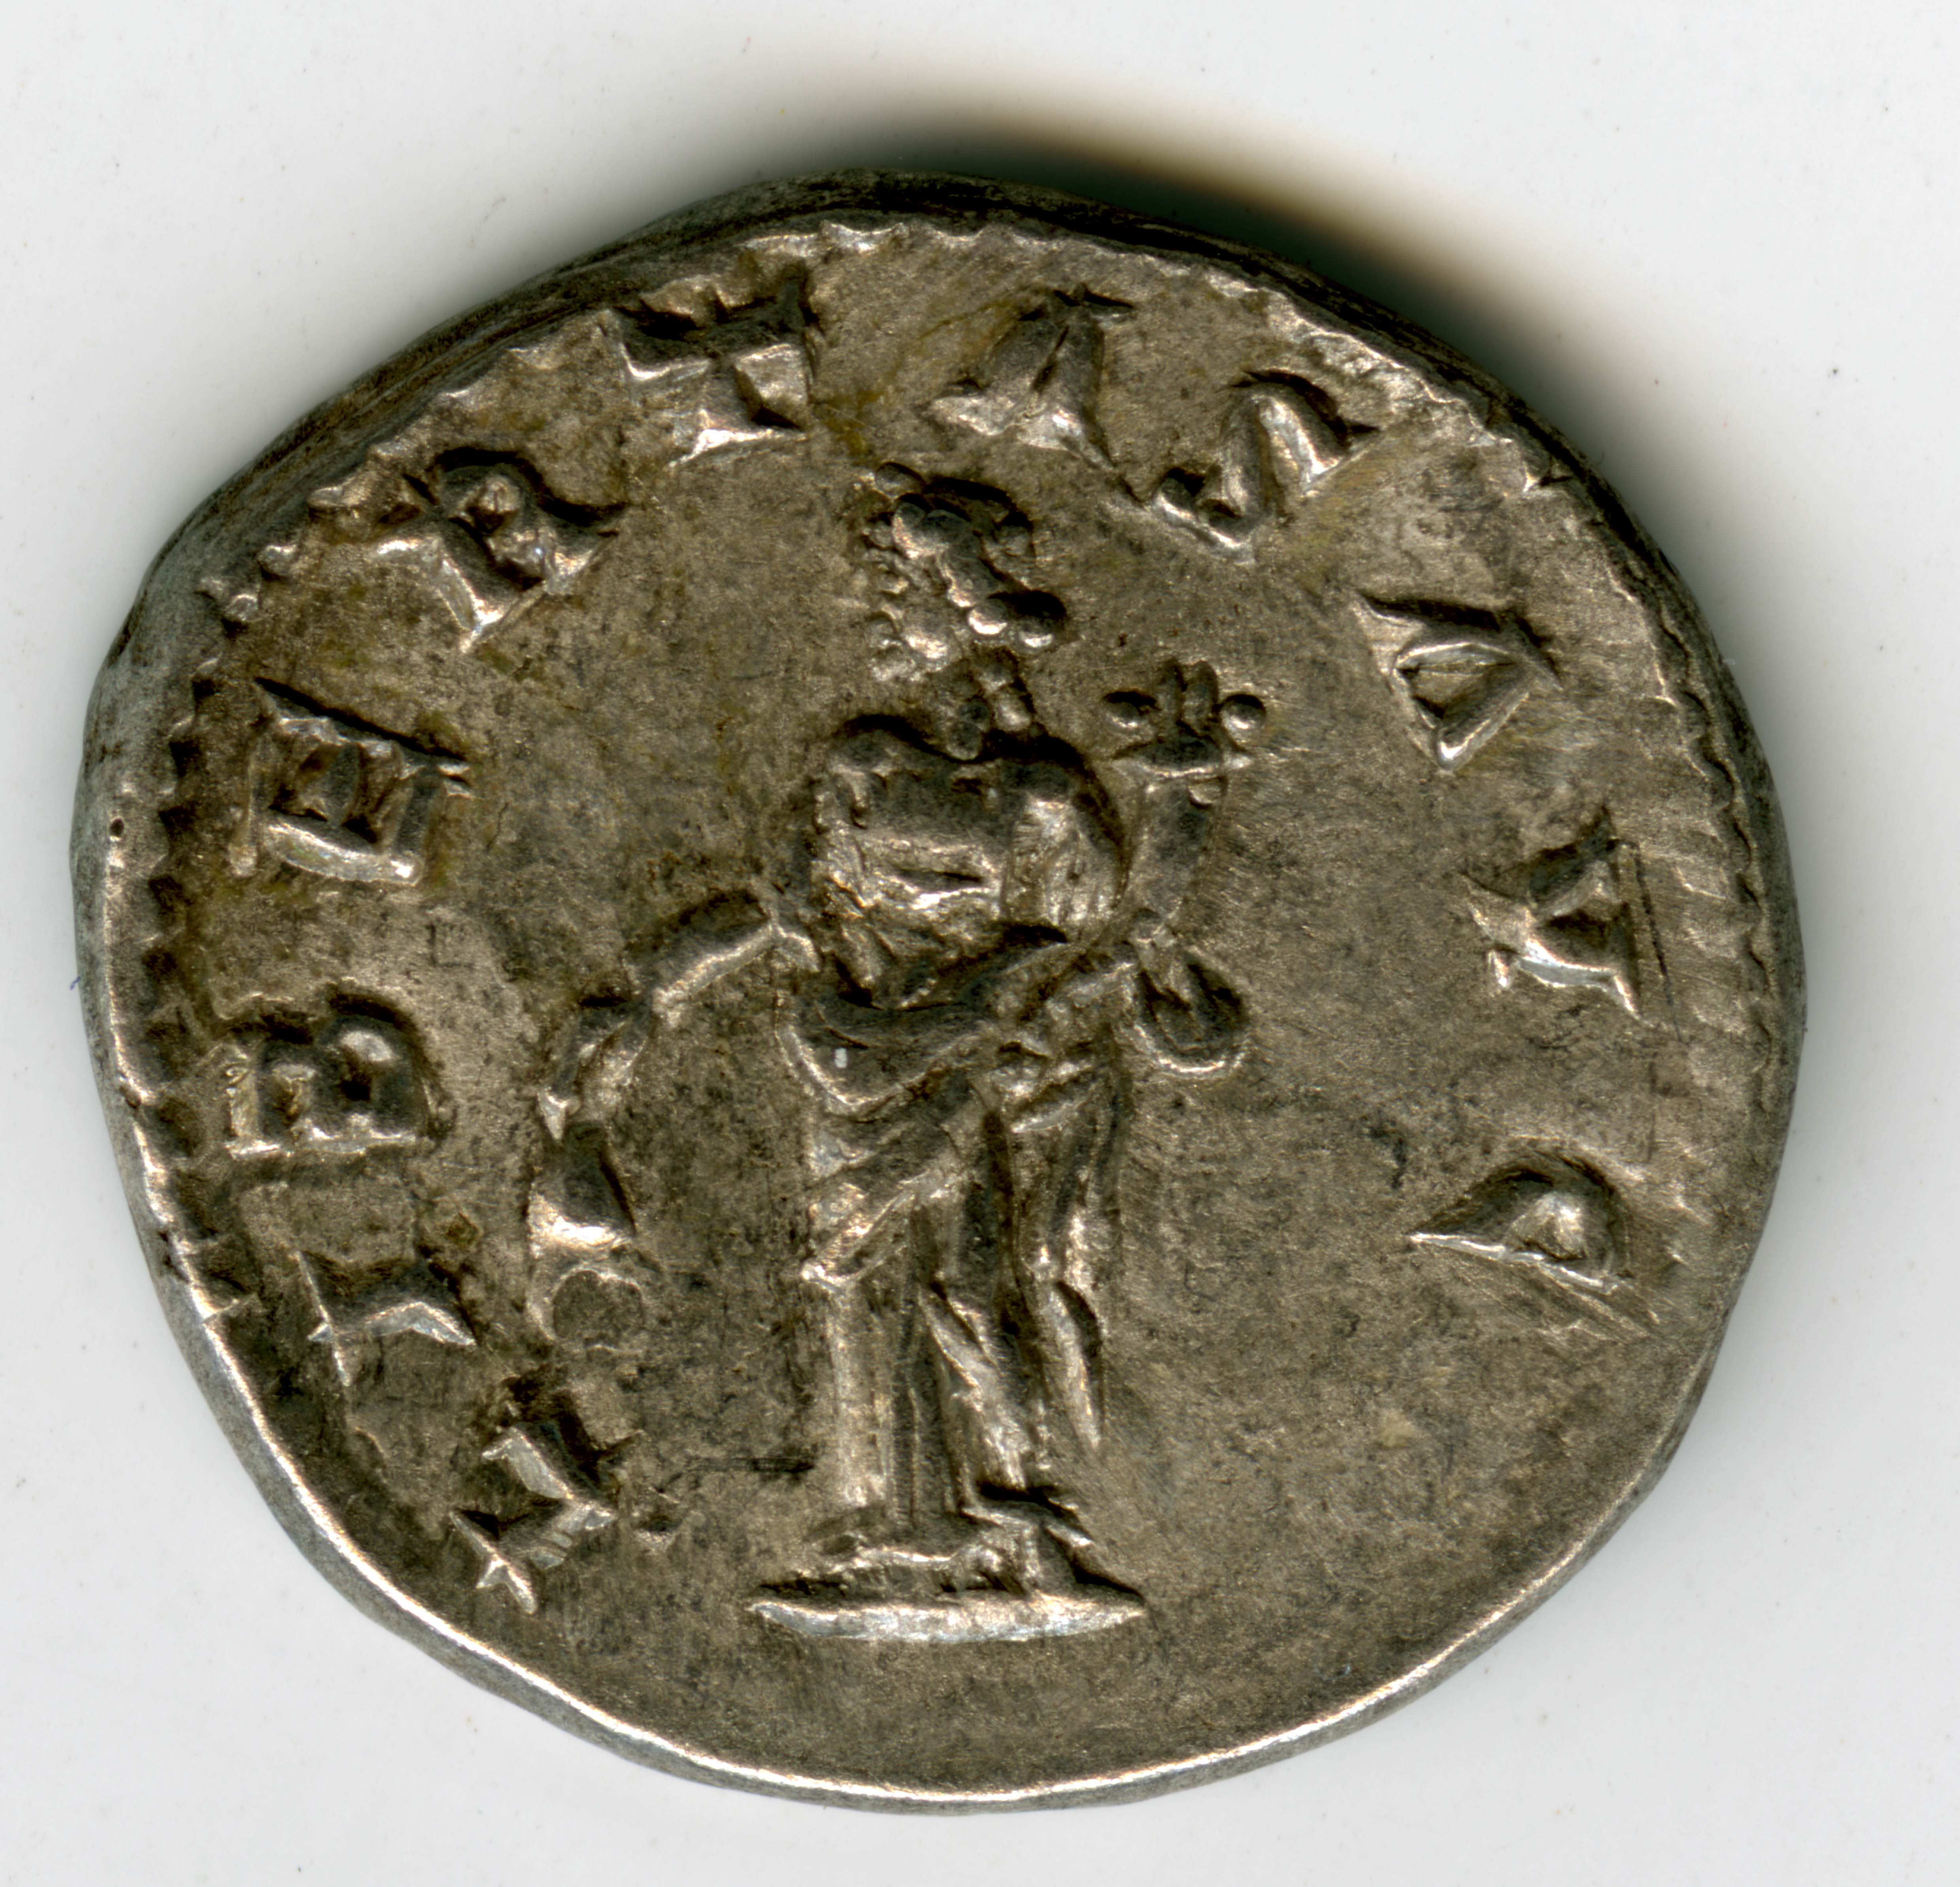 Reverse of coin_014 showing Libertas